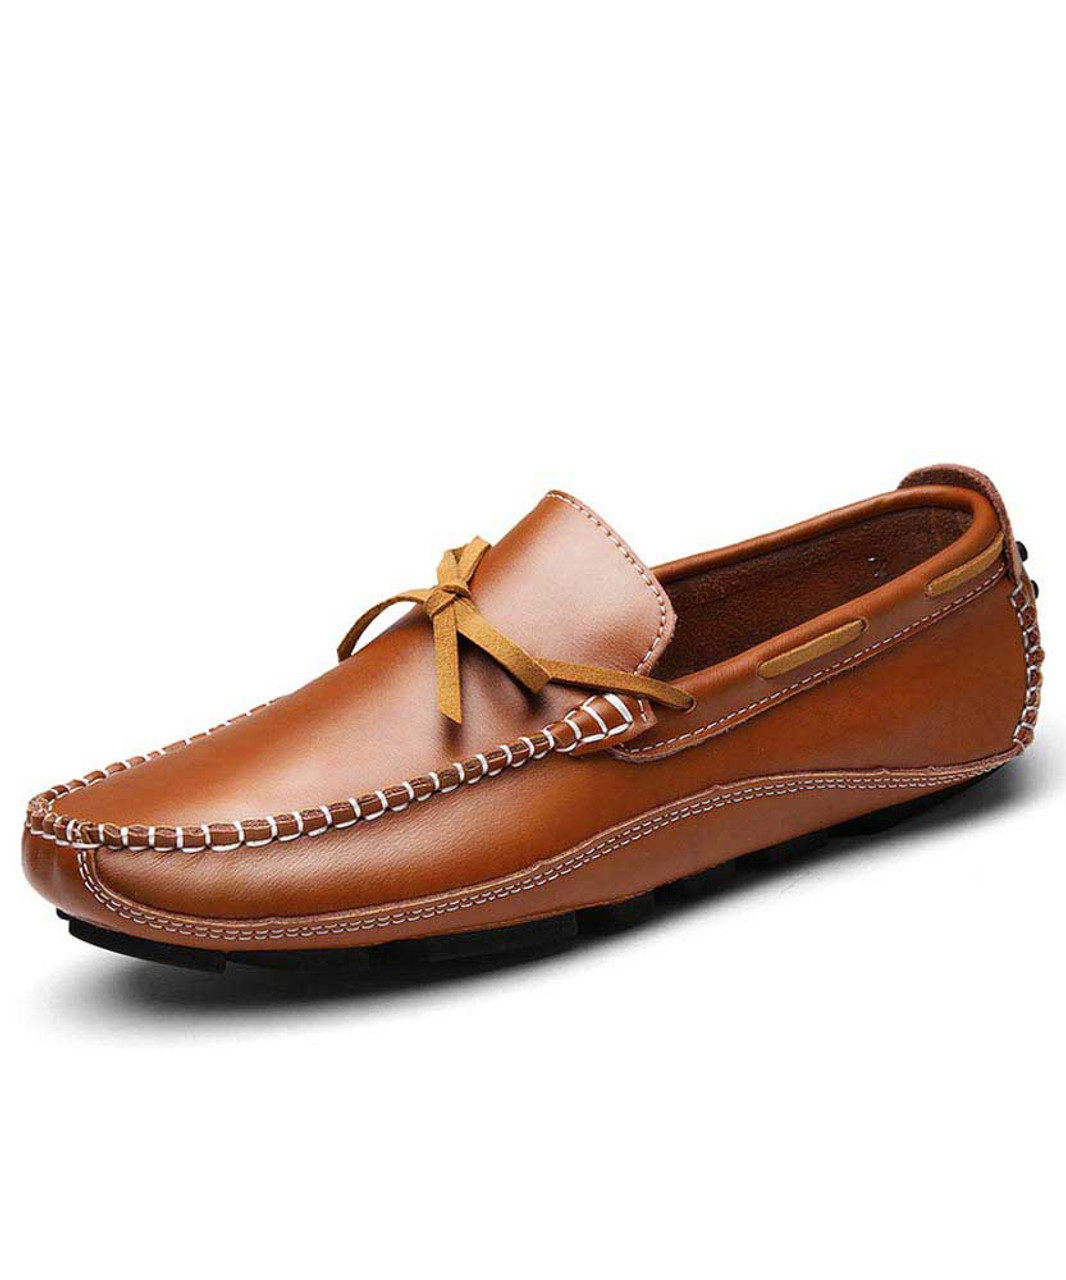 mens tan leather slip on shoes